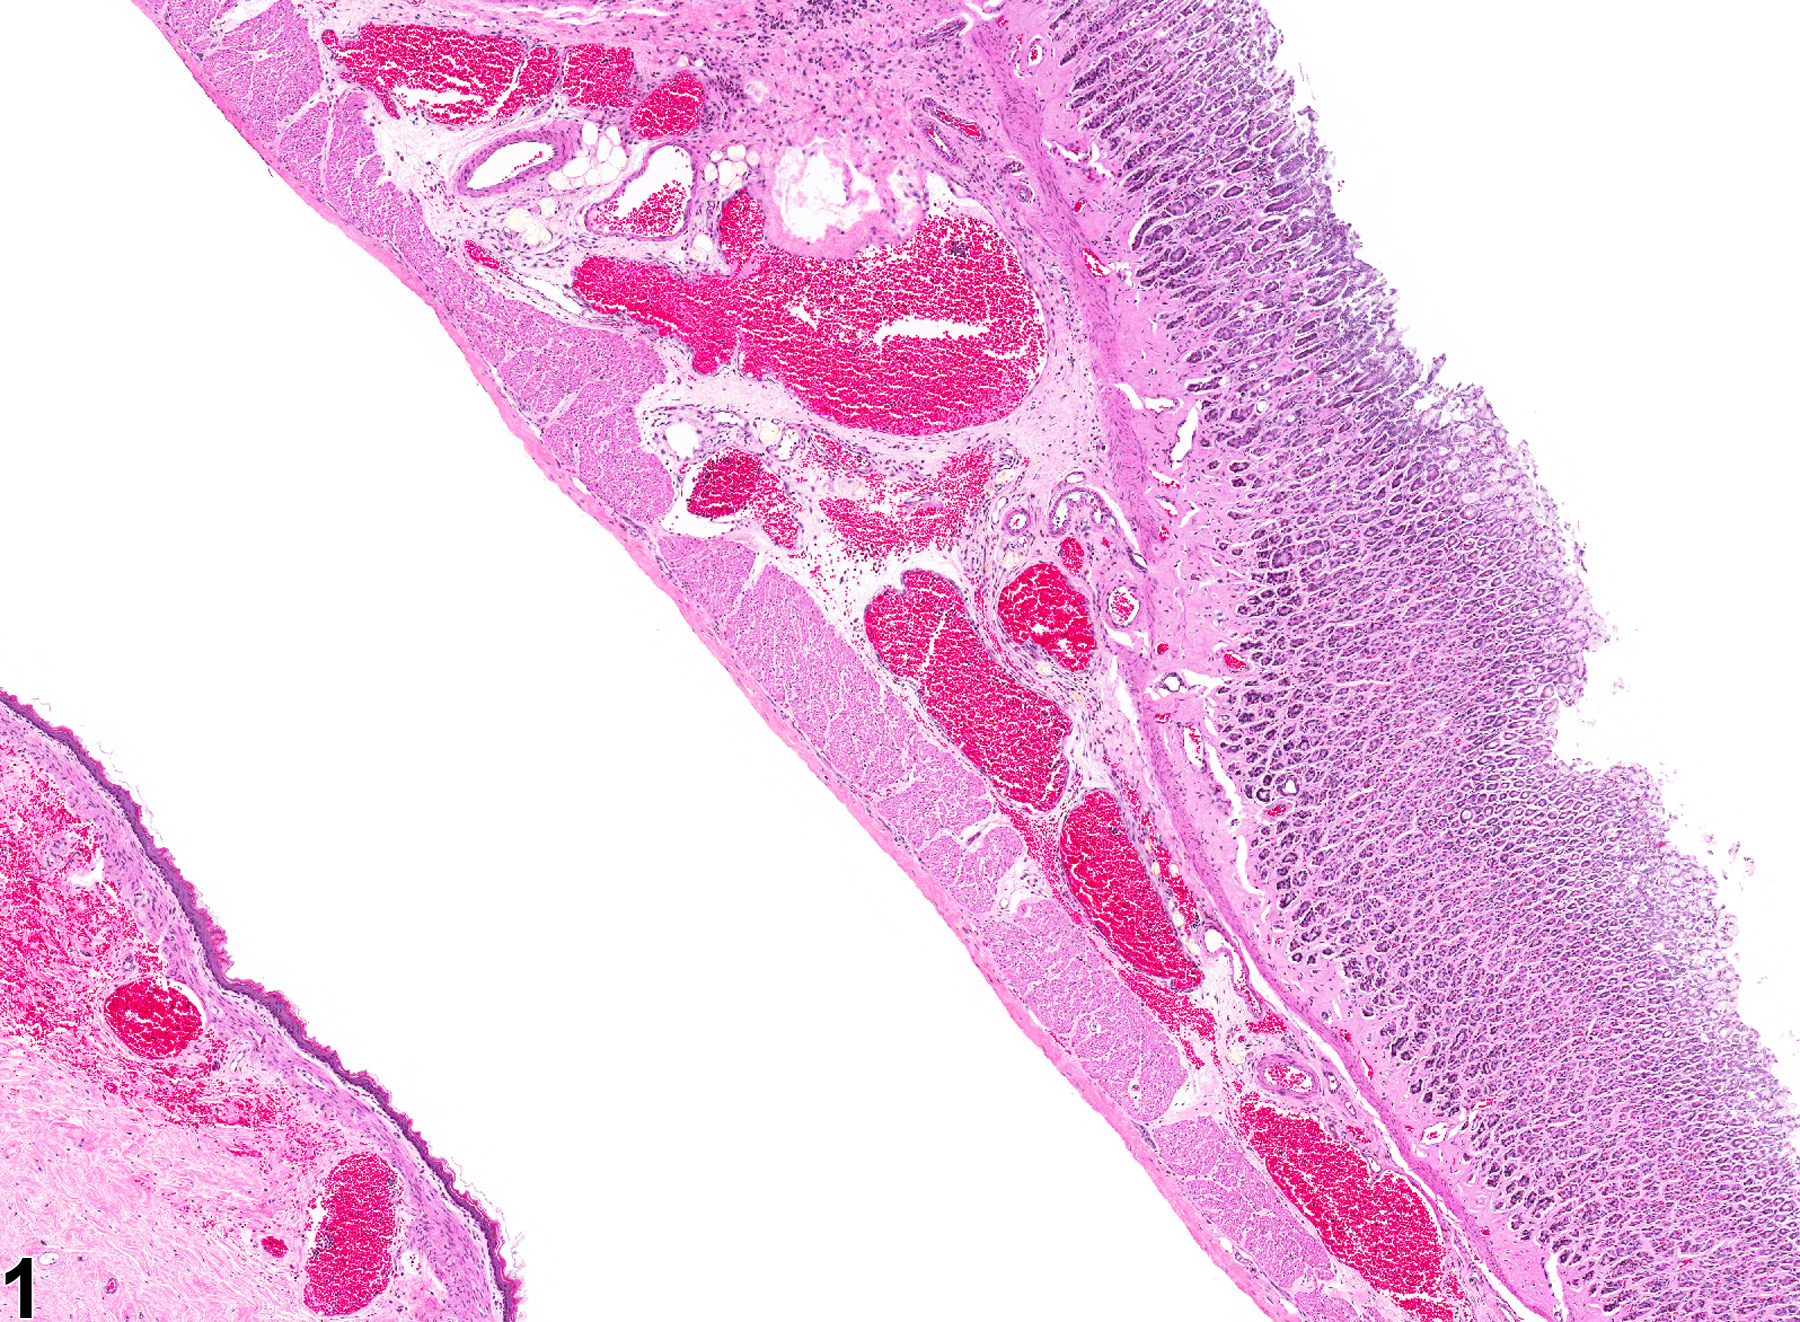 Image of angiectasis in the glandular stomach from a male F344/N rat in a chronic study